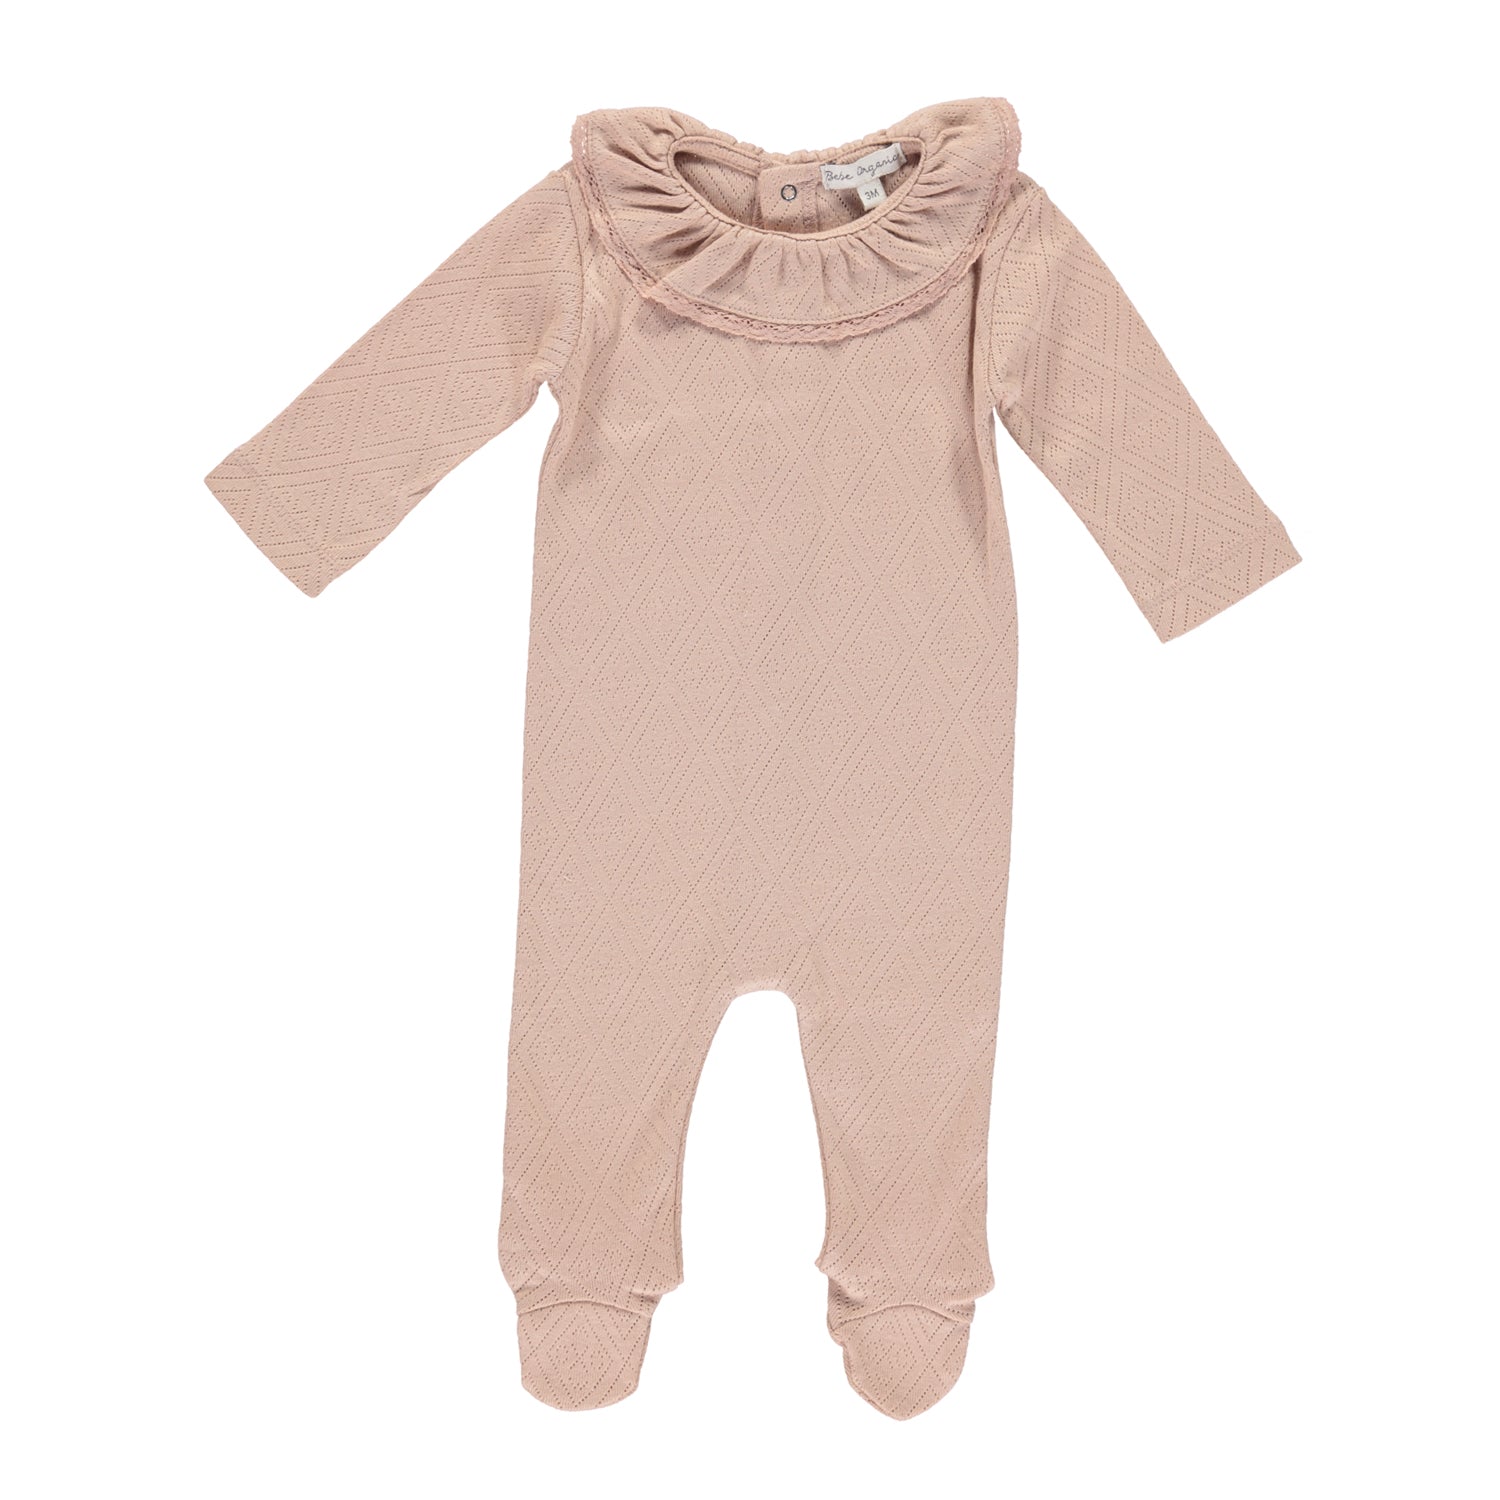 Bebe Lace Overall - Blush Pointelle